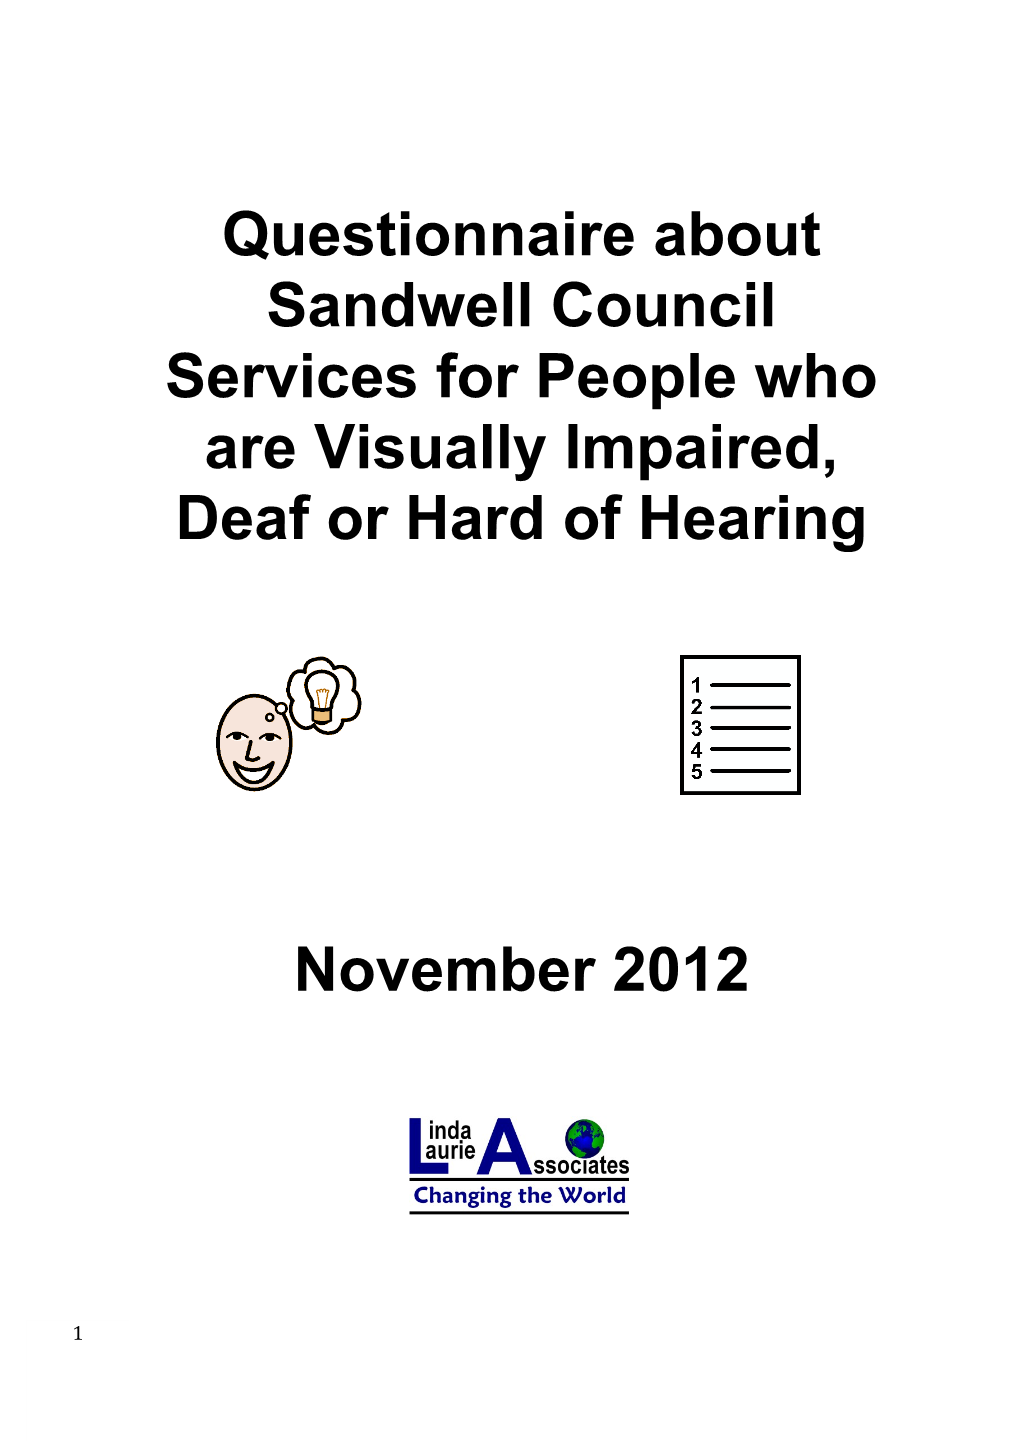 Questionnaire About Sandwell Council Services for People Who Are Visually Impaired, Deaf